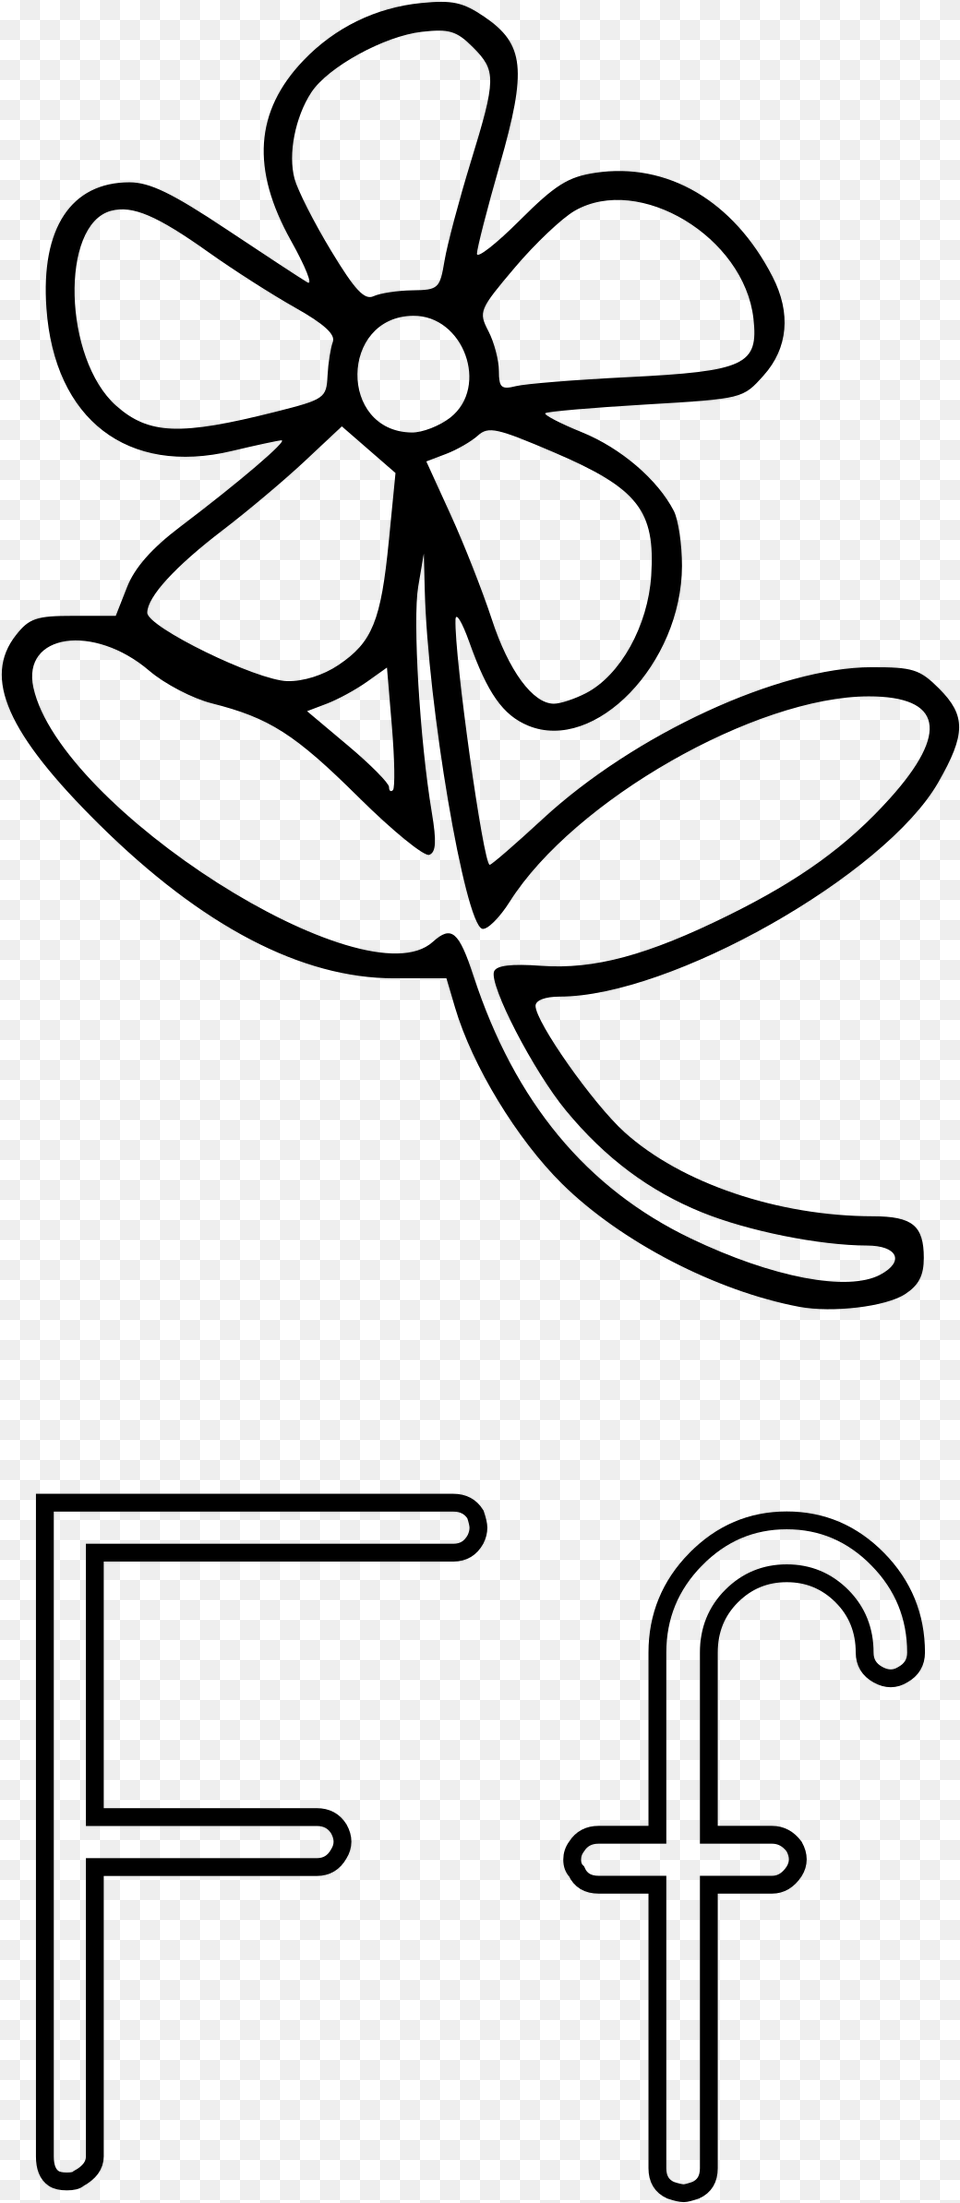 This Icons Design Of F Is For Flower, Gray Png Image